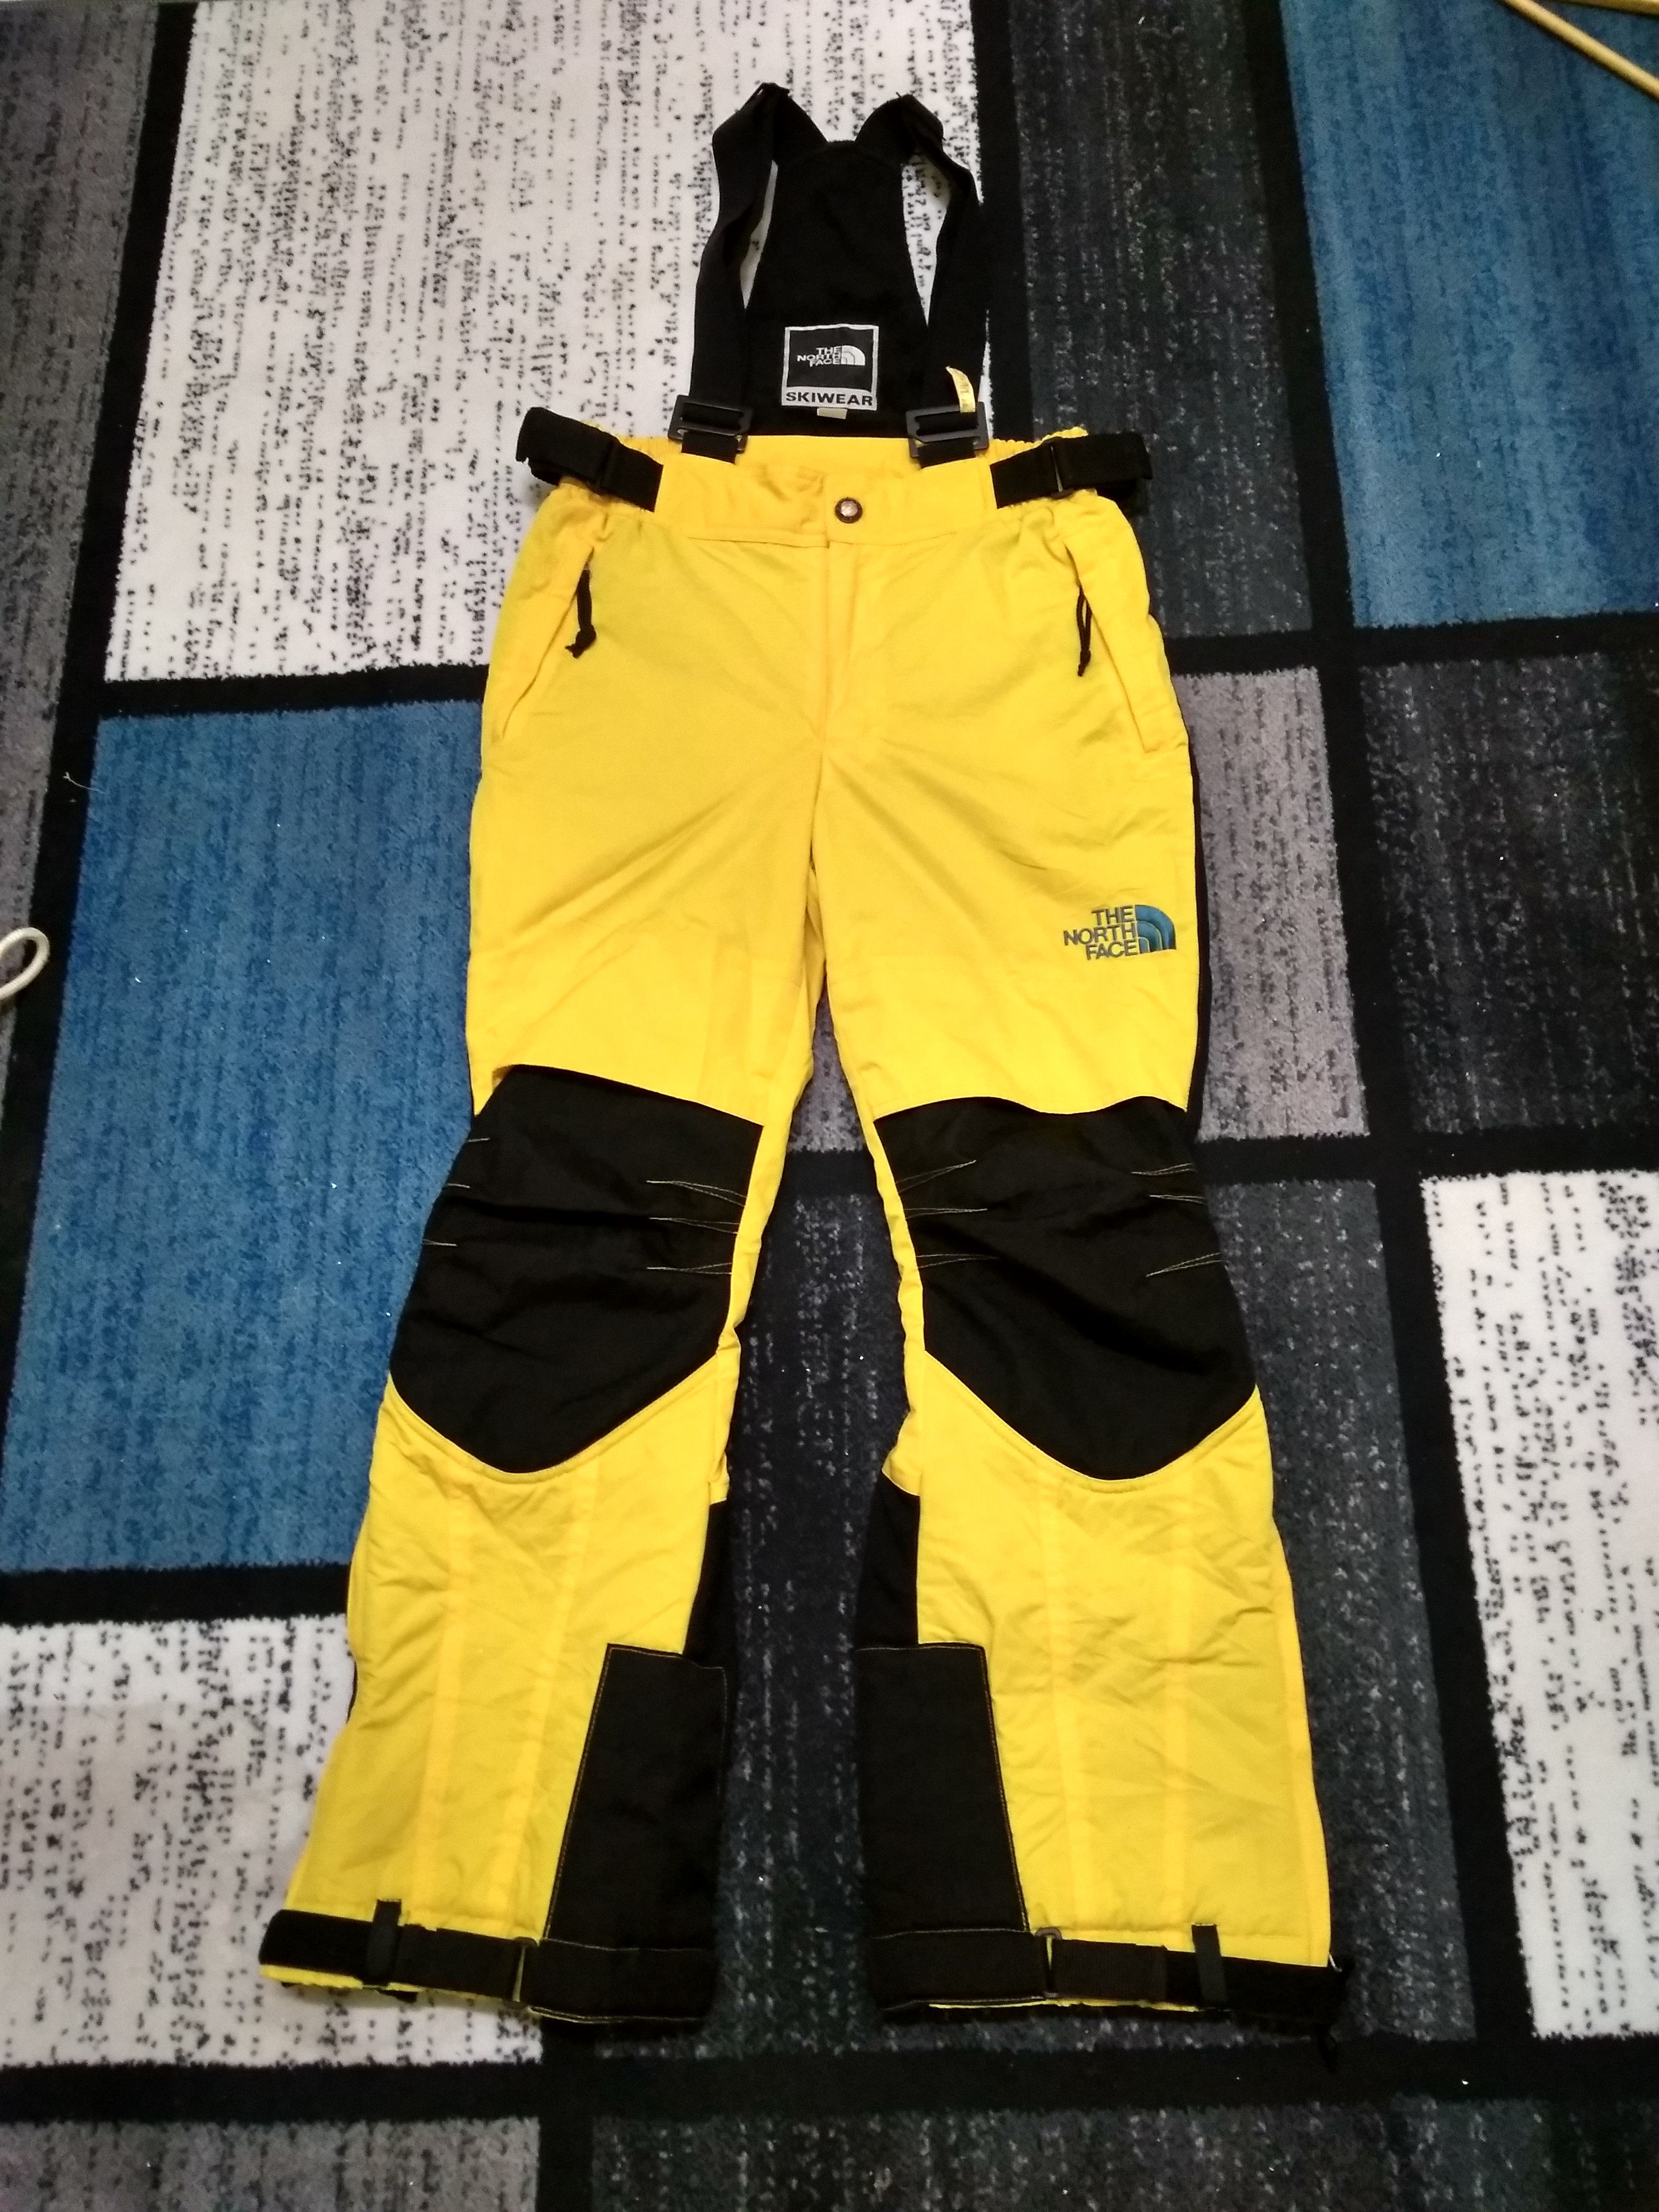 The North Face The North Face Overall Skiwear Size US 33 - 1 Preview